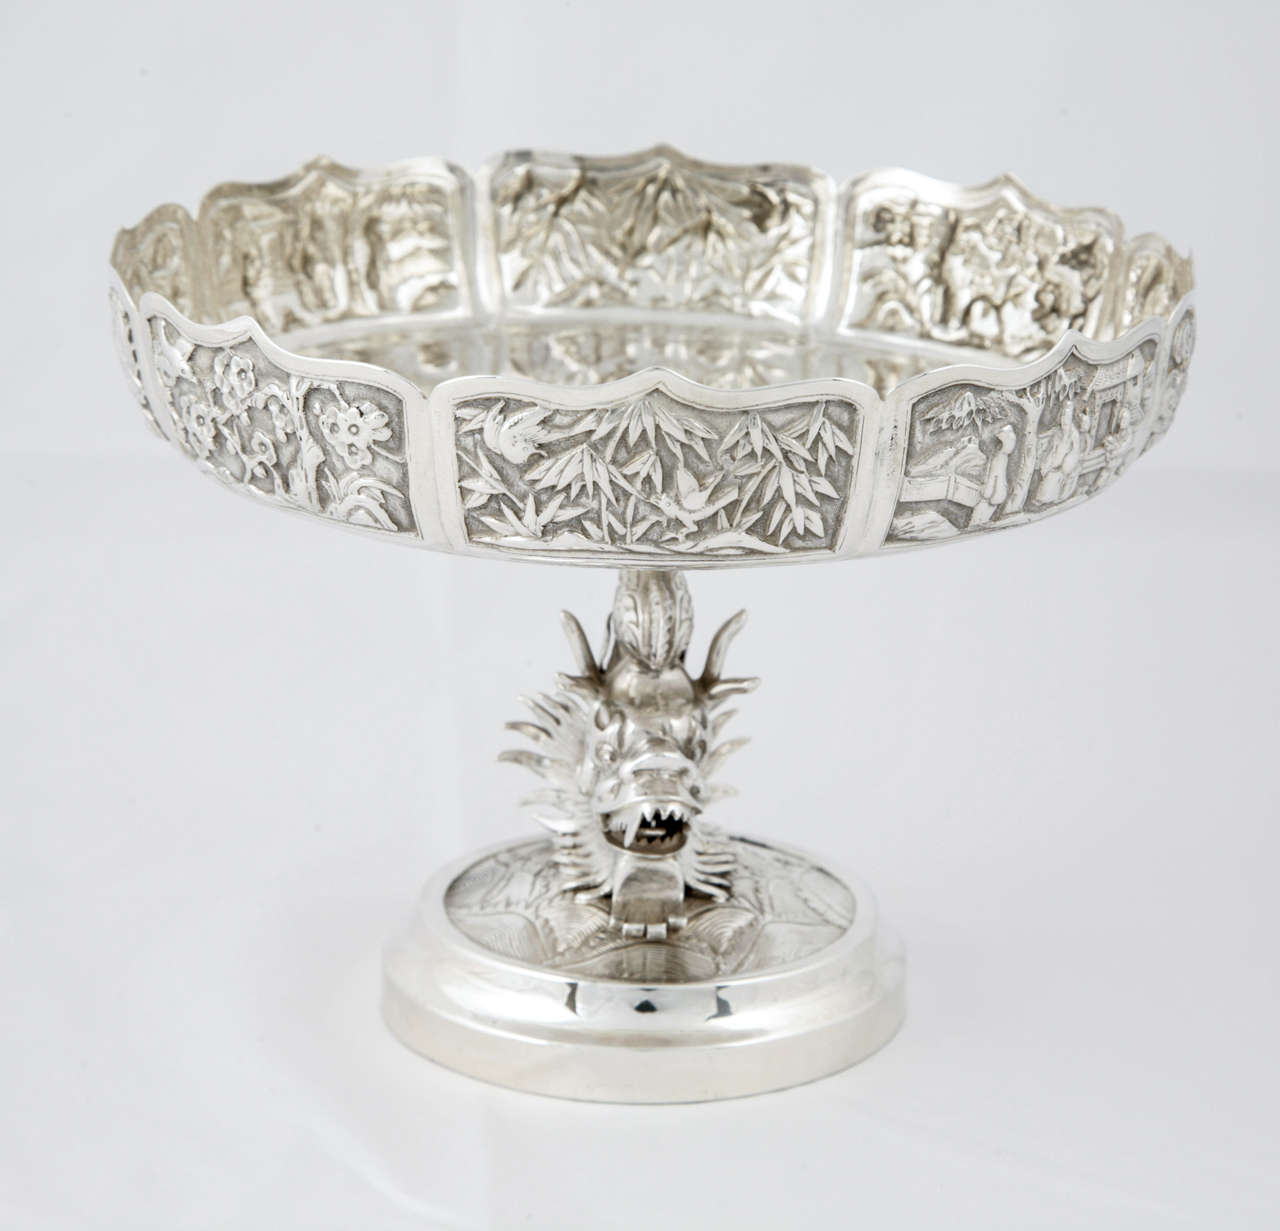 Pair of Chinese export silver tazzas standing on a dragon stem. The panels around the top decorated with a village scene, prunus, dragons and bamboo. The dish, Stand and base are held together by a single rod secured underneath the base. They are